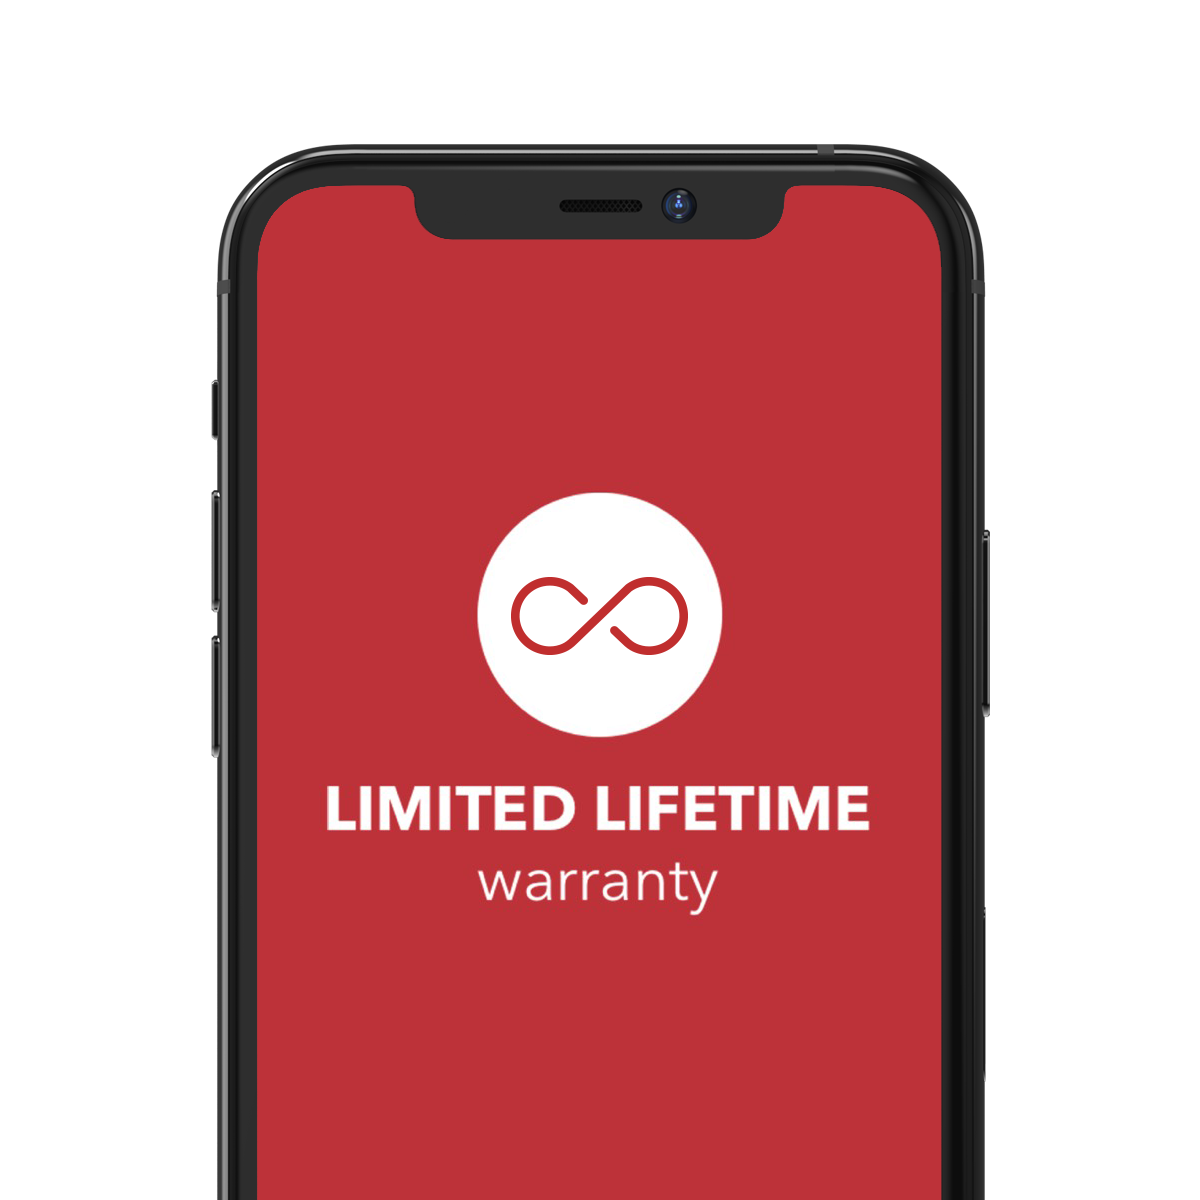 Limited Lifetime Warranty
||If your Glass Elite ever gets worn or damaged, we will replace it for as long as you own your device.
